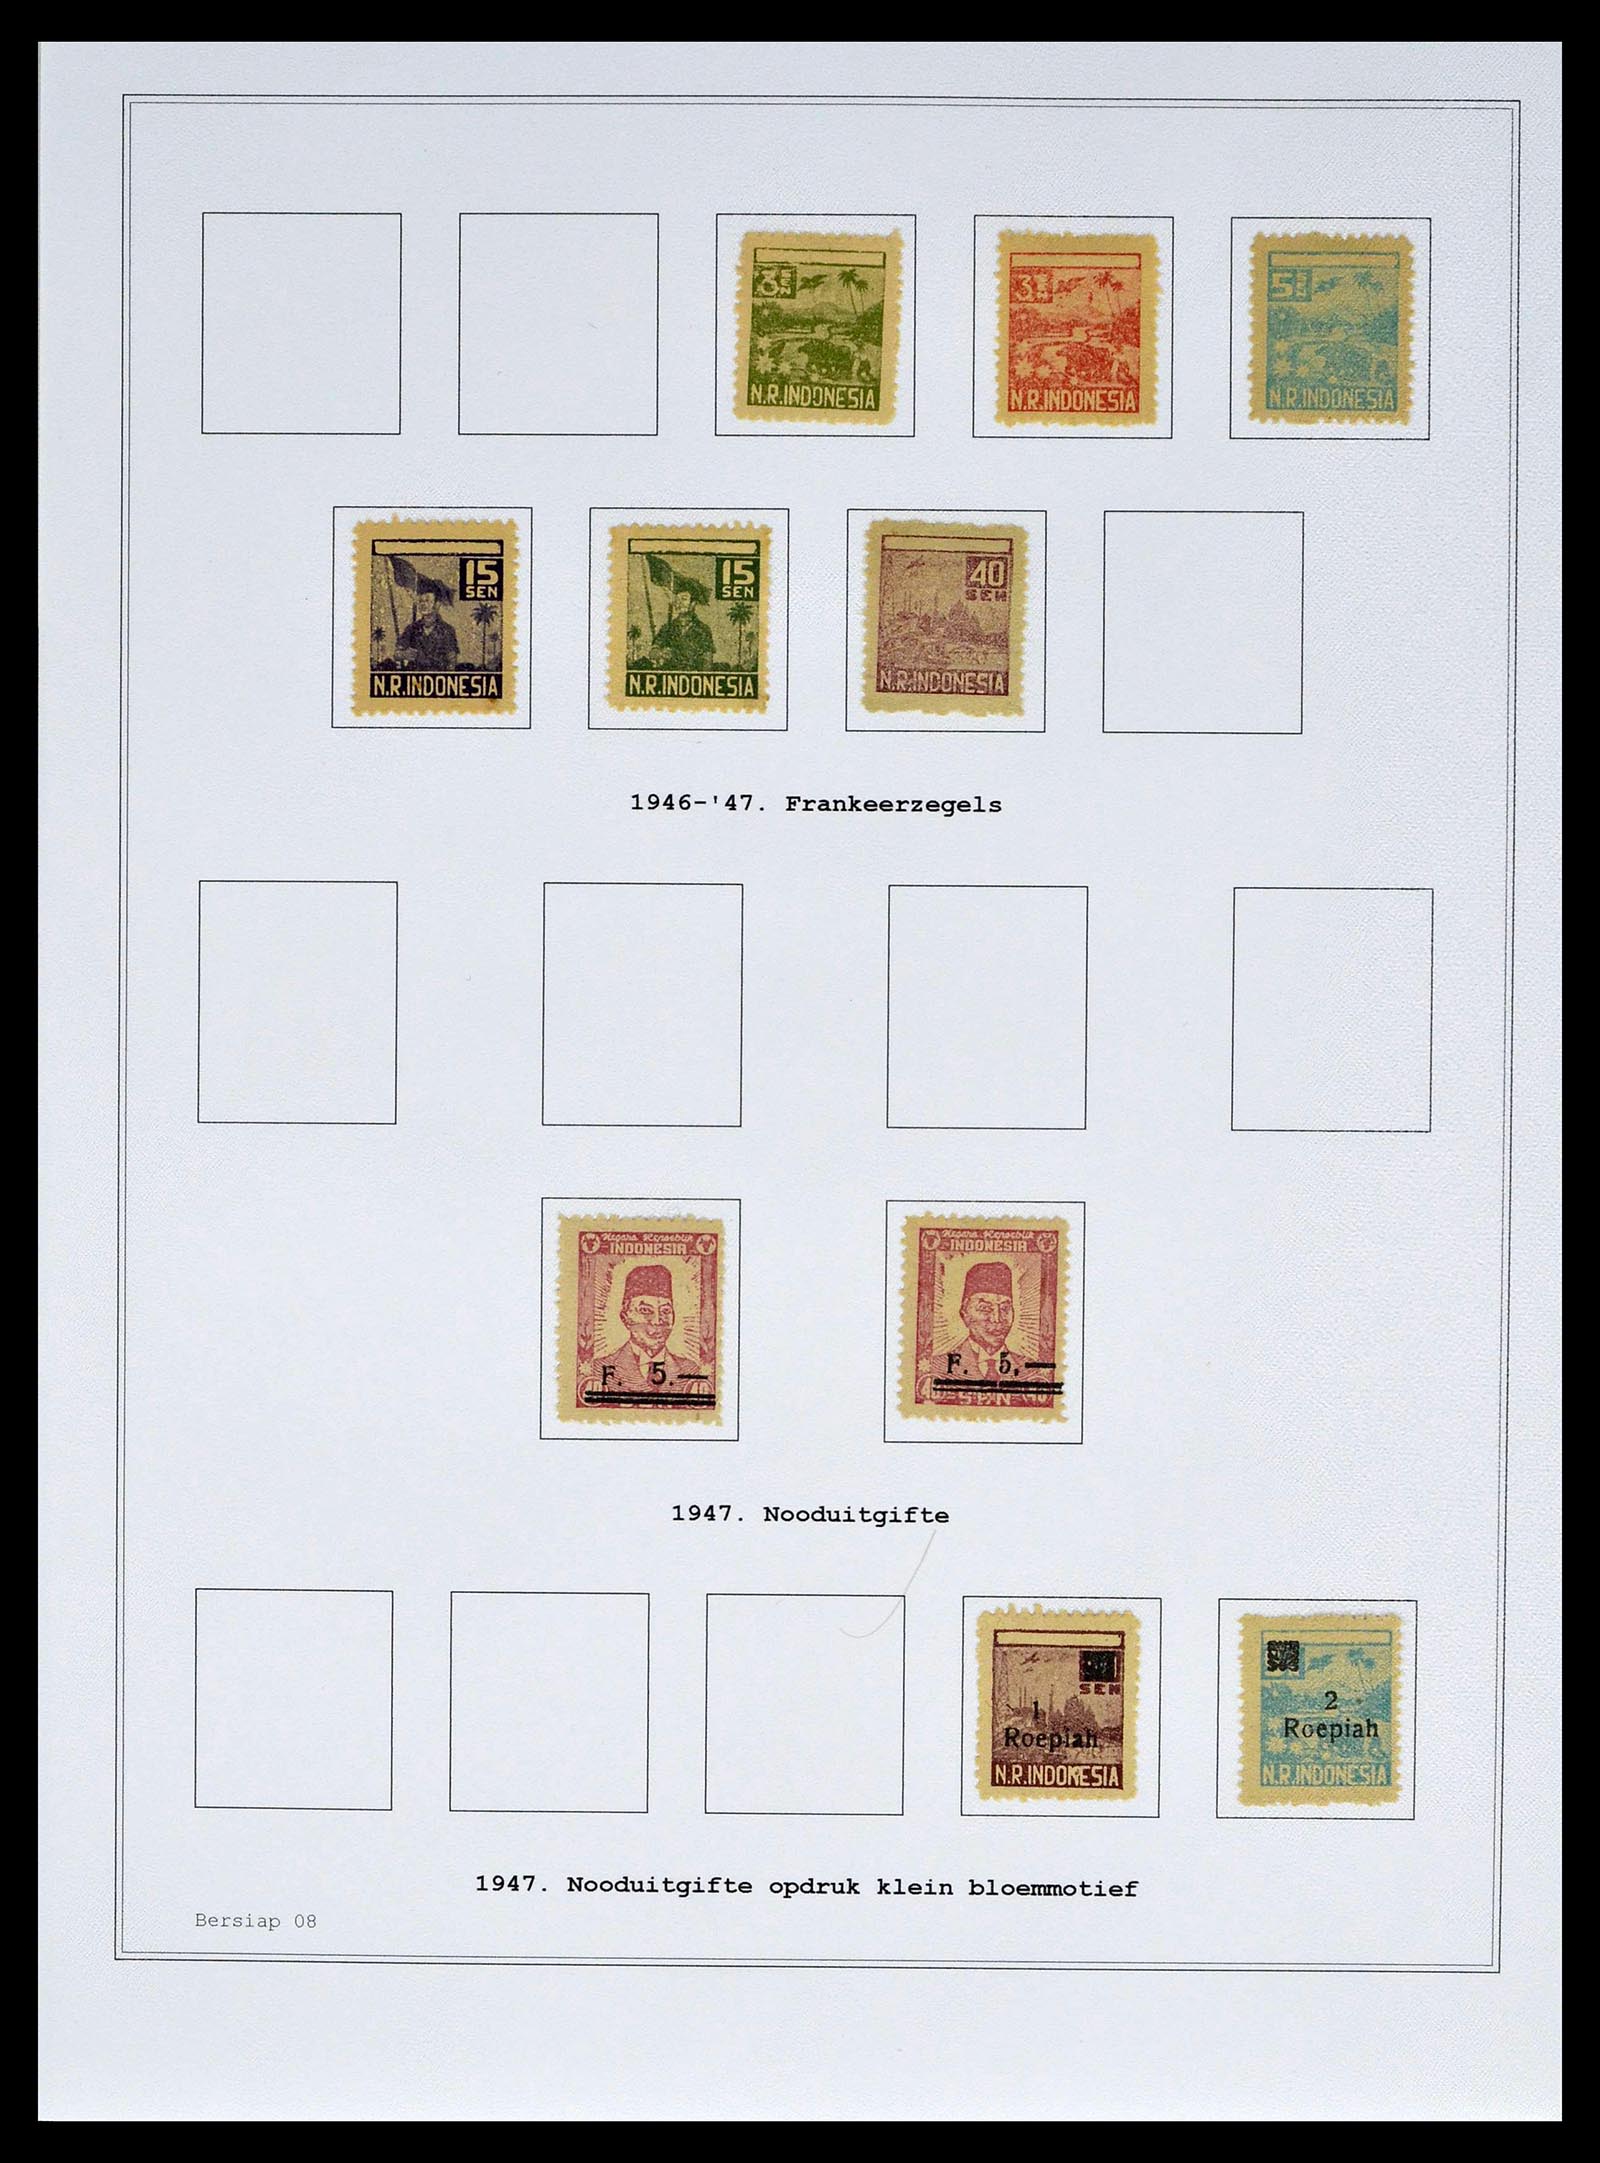 39026 0090 - Stamp collection 39026 Dutch east Indies and Suriname 1864-1975.